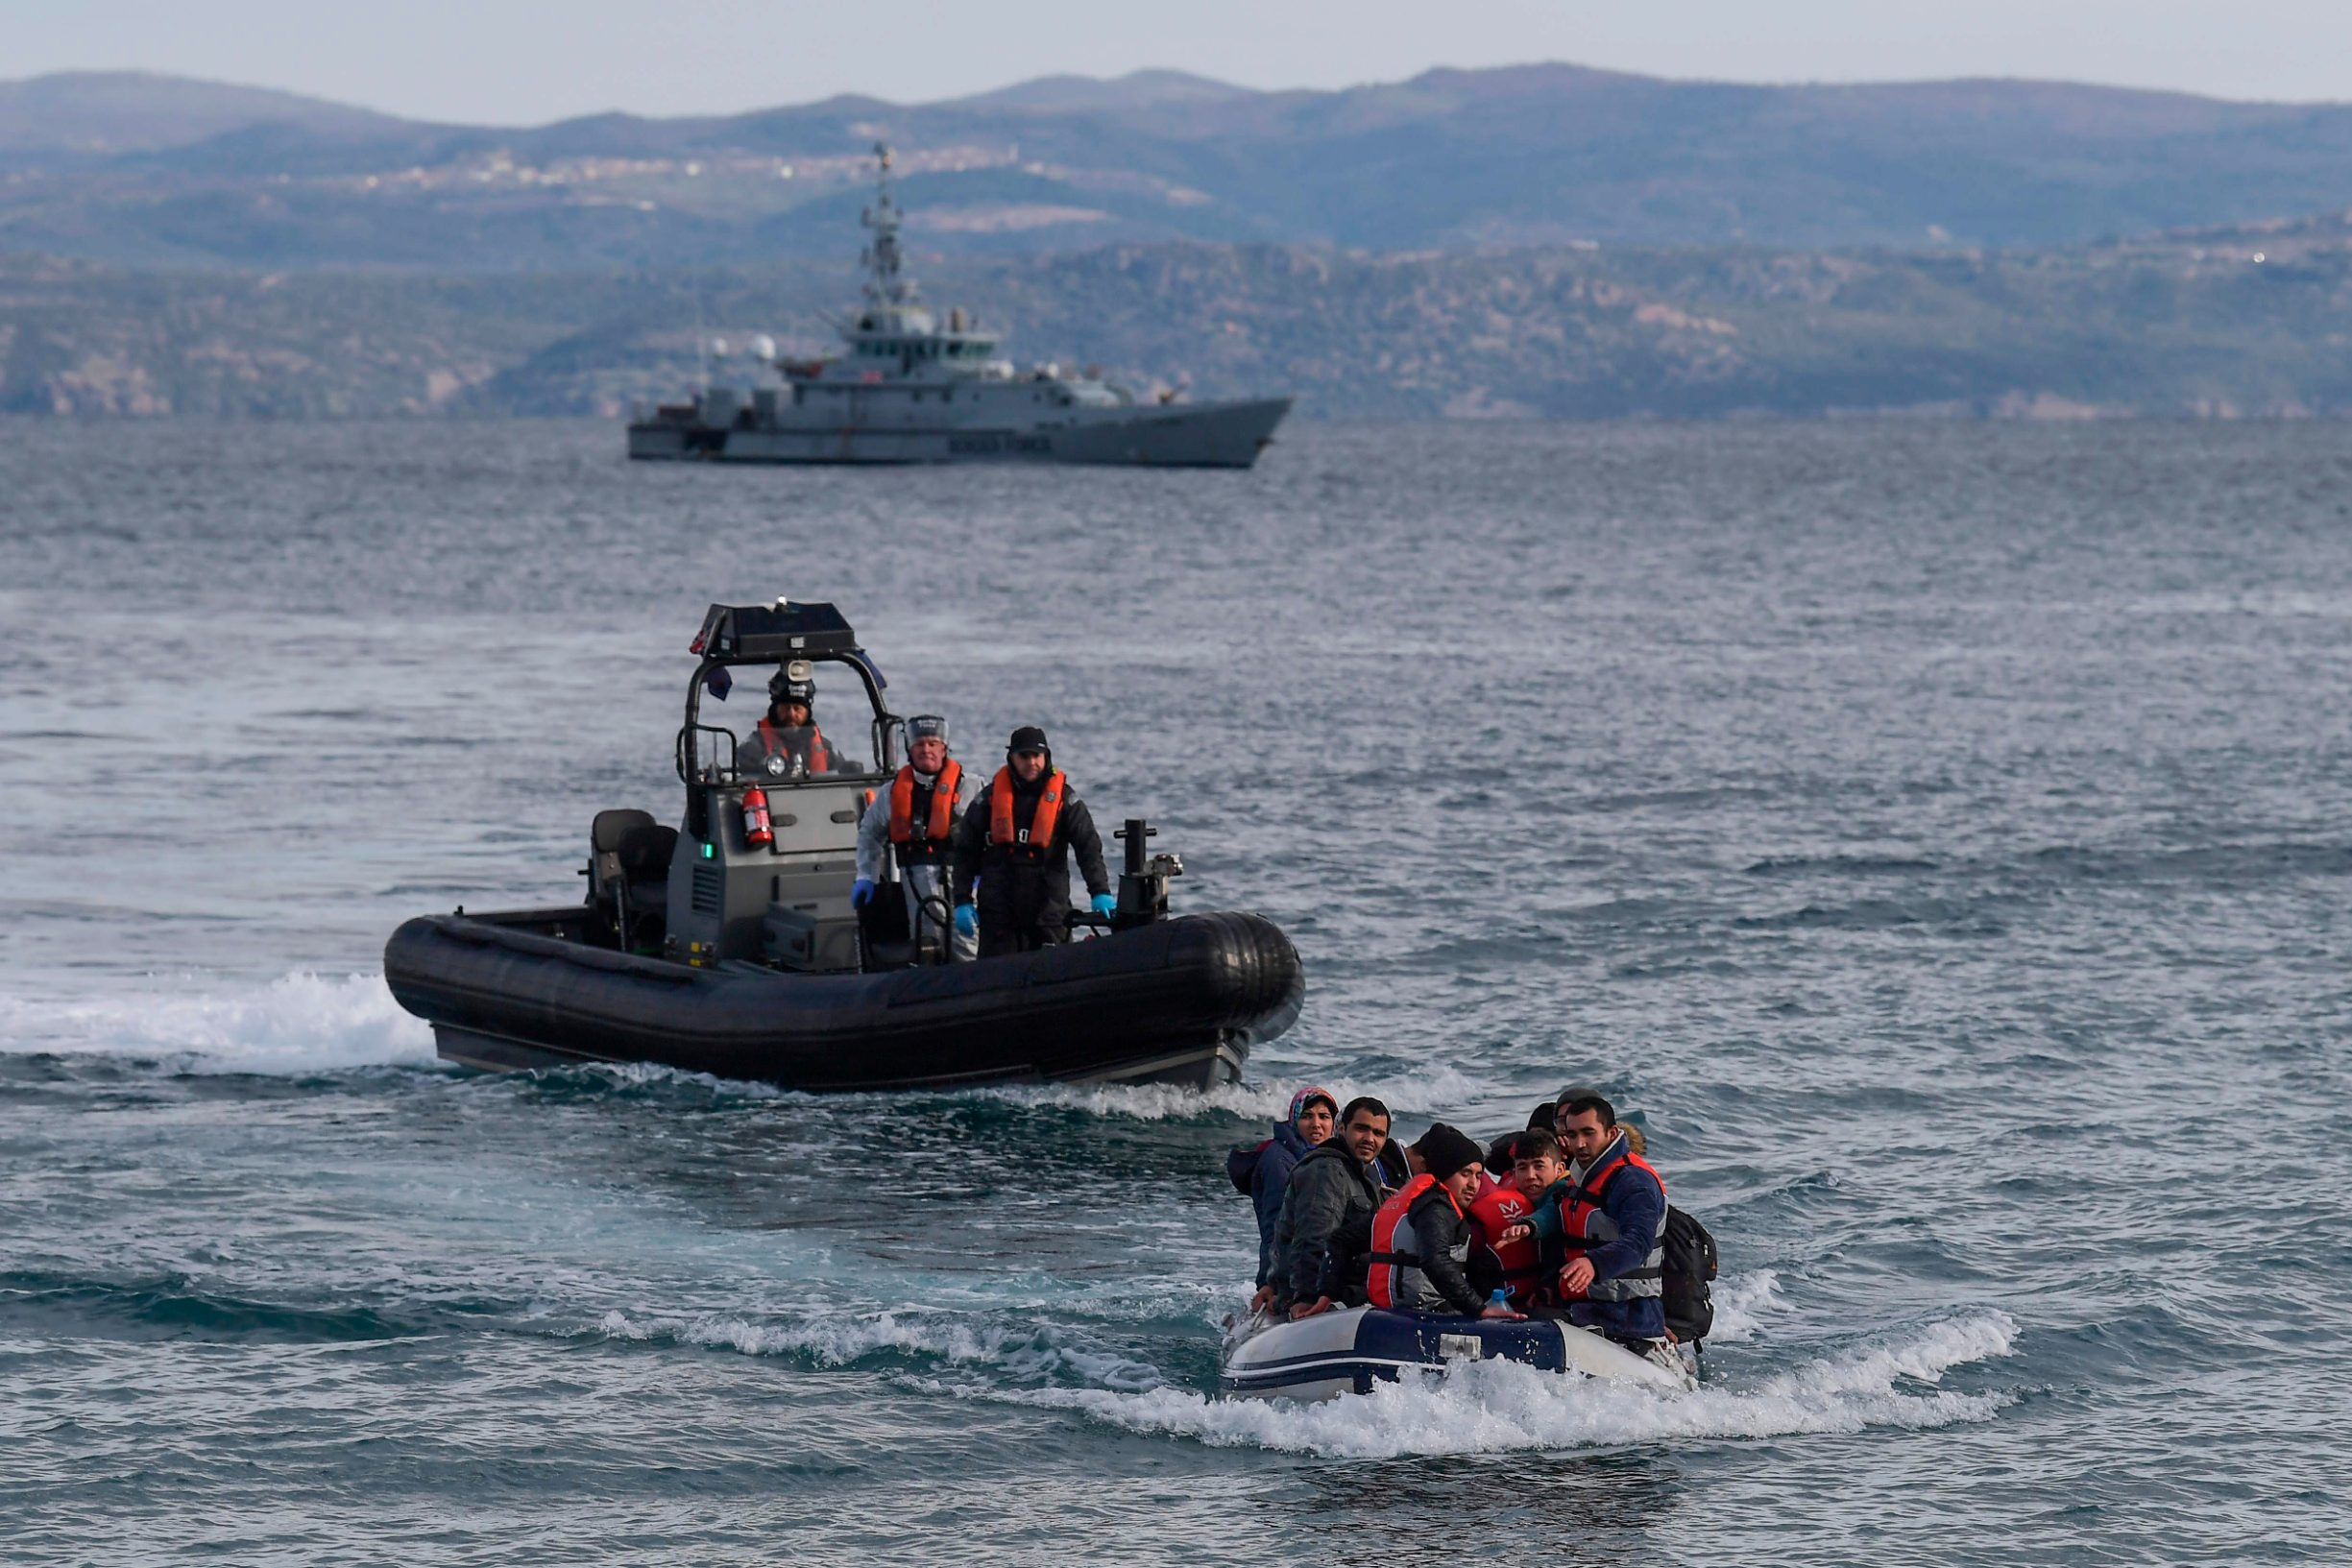 A dinghy with 15 Afghan refugees, 5 children, 3 women and 7 men, approaches the Greek island of Lesbos on February 28, 2020 next to UK Border Force patrol boat HMC Valiant (background), a cutter patroling in Agean sea under European Union border force Frontex. - Turkey will no longer close its border gates to refugees who want to go to Europe, a senior official told AFP on February 28, shortly after the killing of 33 Turkish soldiers in an airstrike in northern Syria. (Photo by ARIS MESSINIS / AFP)